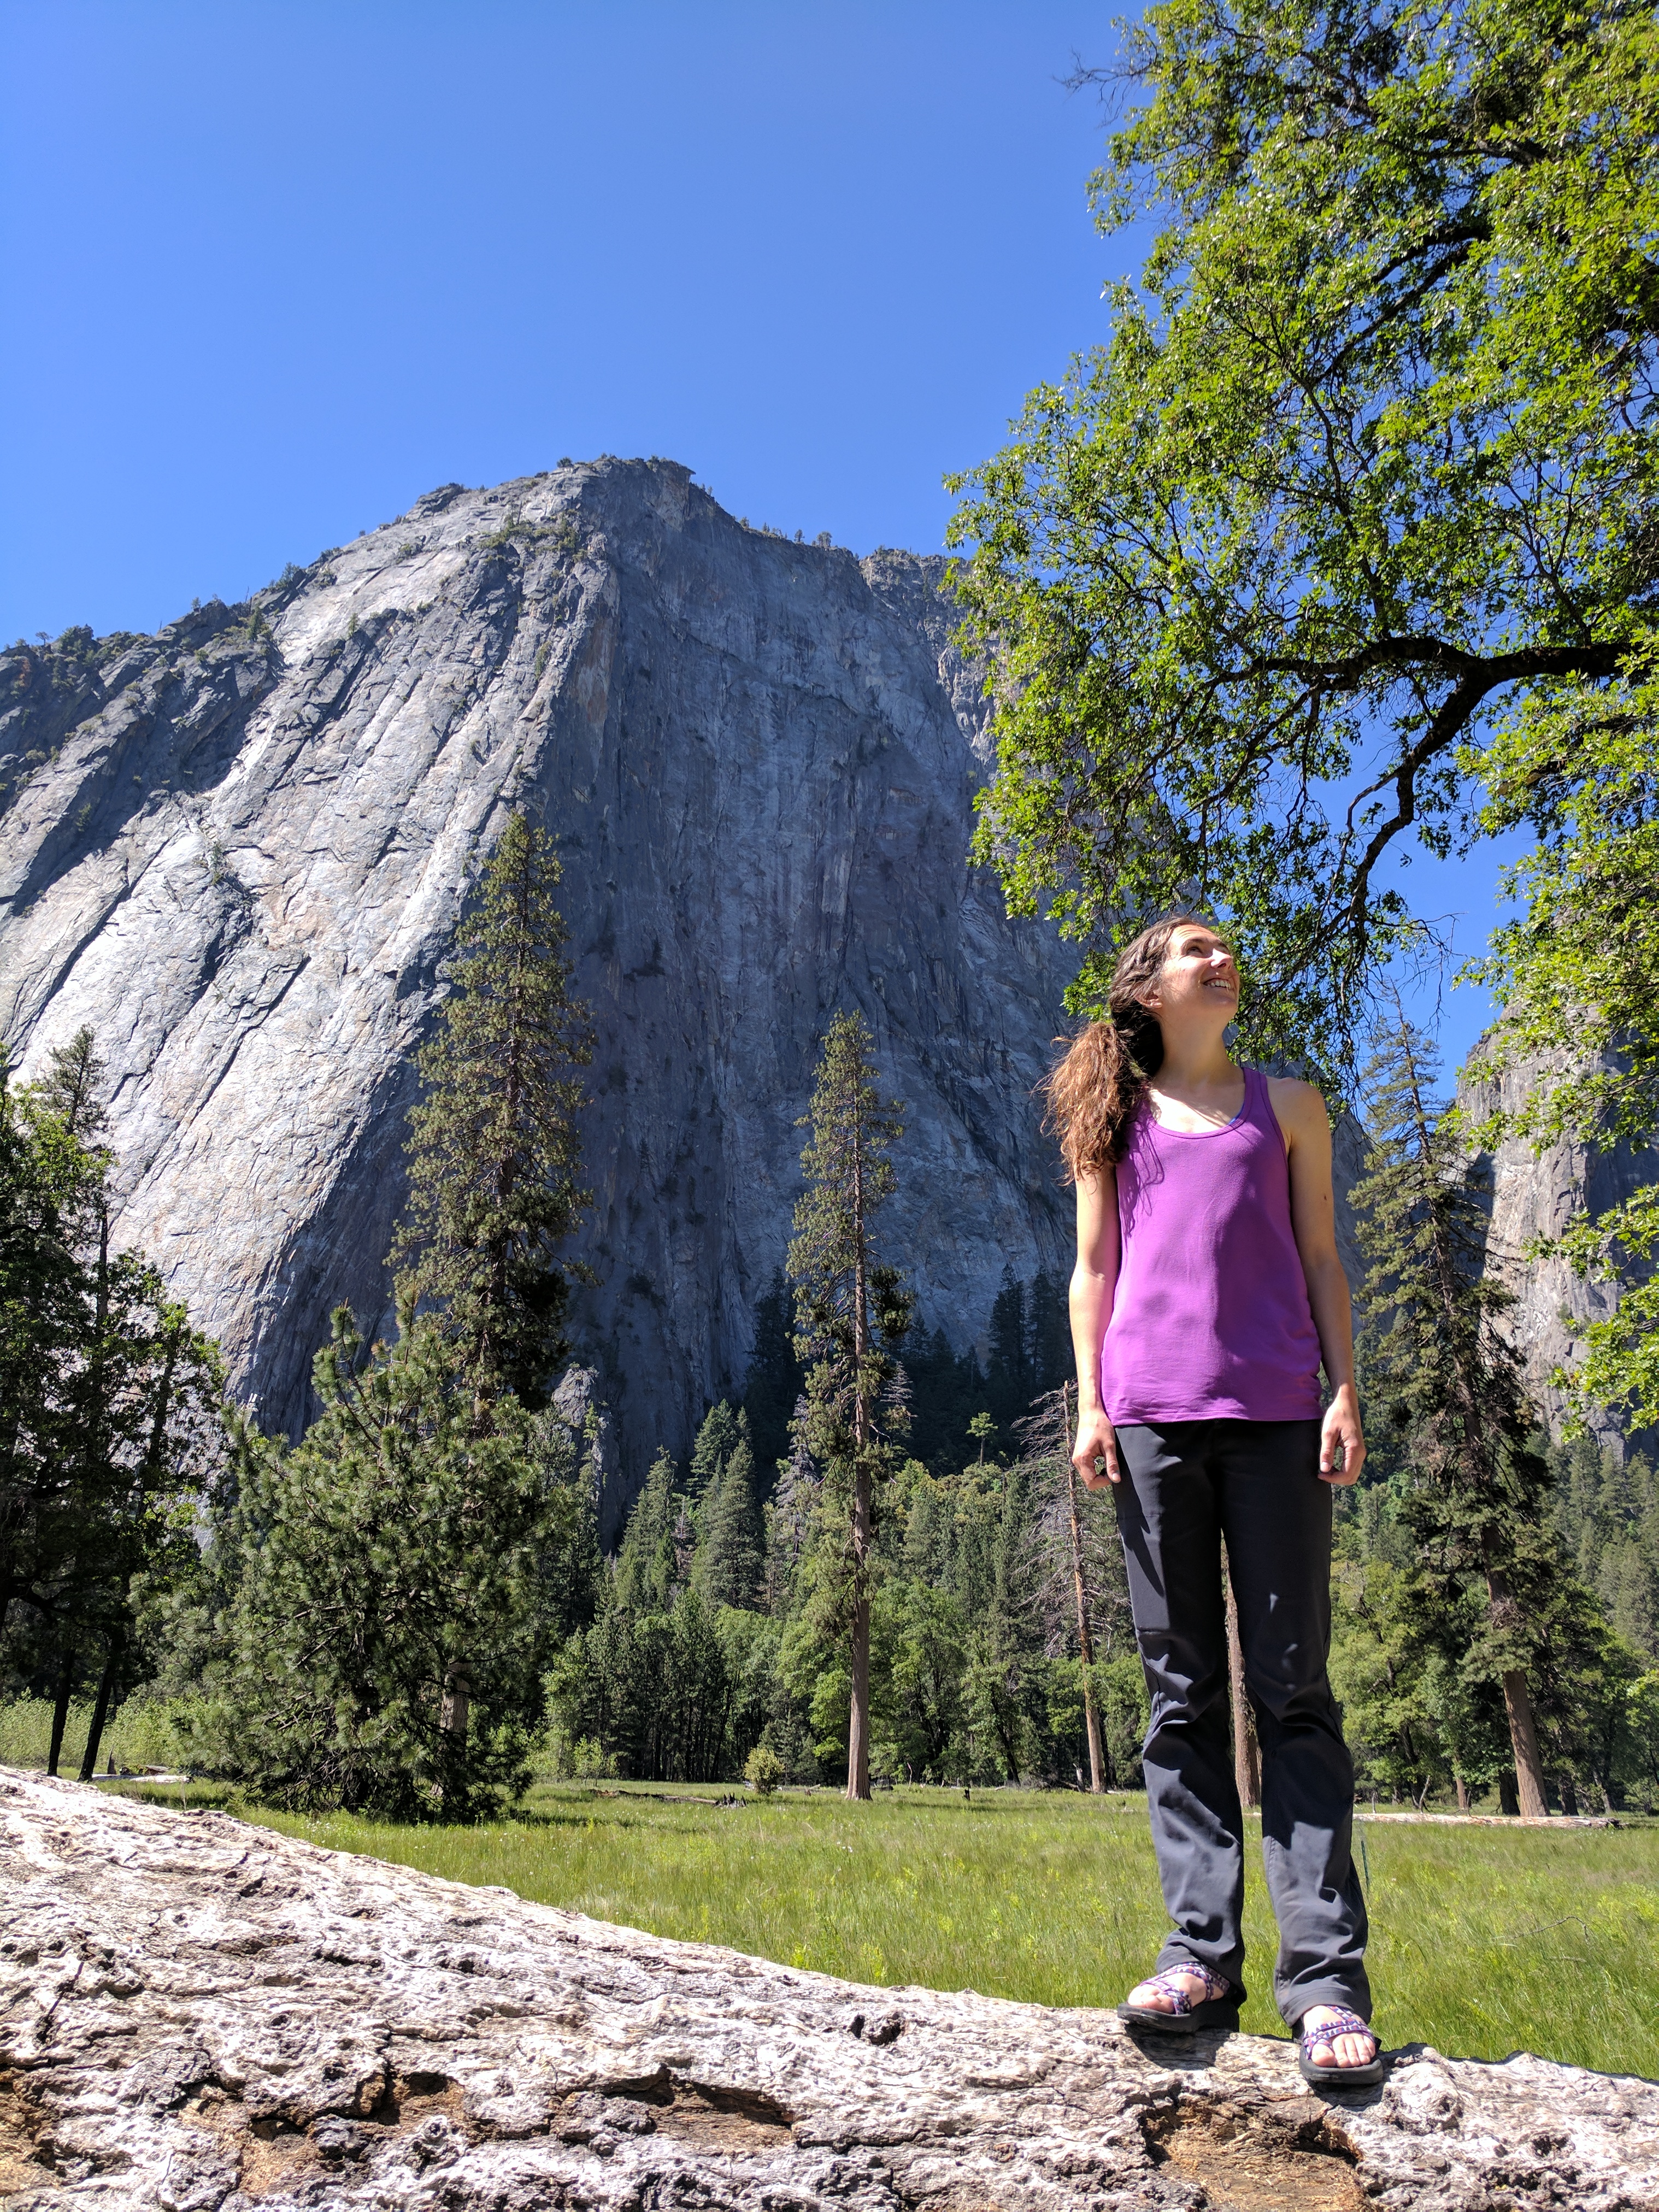 Gazing at El Capitan in Yosemite National Park just 5 days before Alex Honnold made his historic ascent.